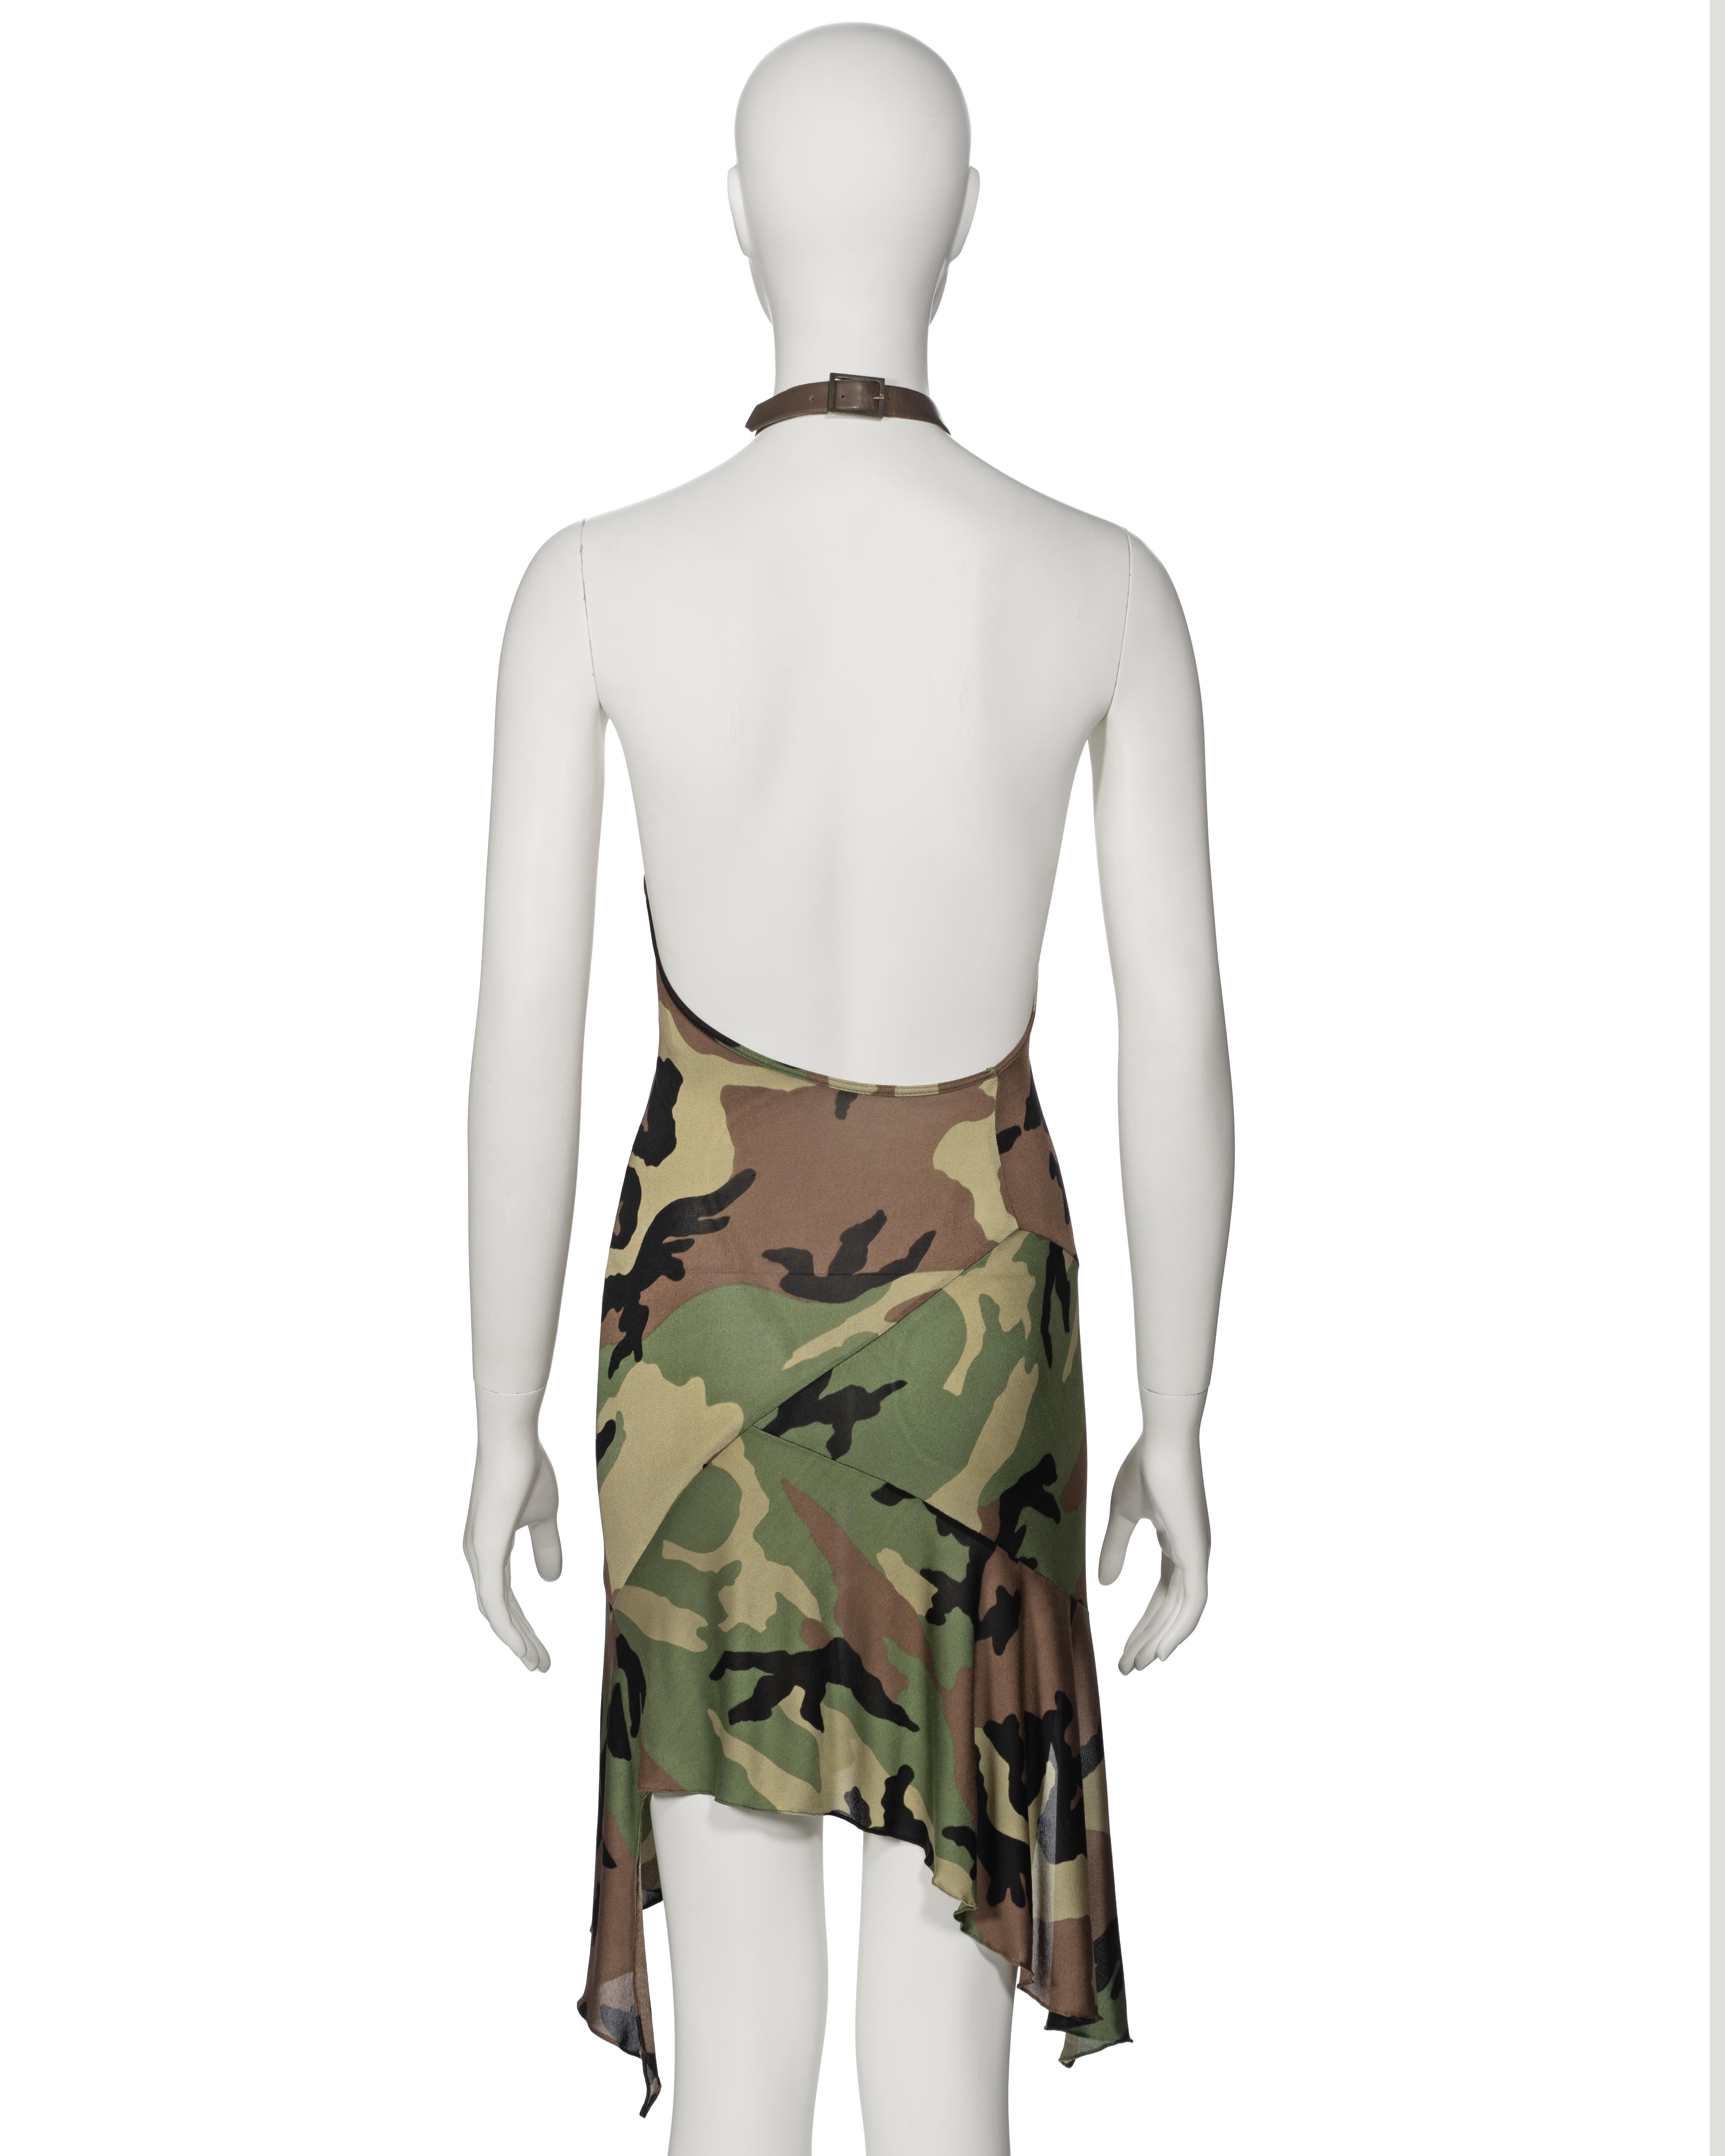 Christian Dior by John Galliano Cameo Print Silk Jersey Halter Dress, ss 2001 For Sale 4